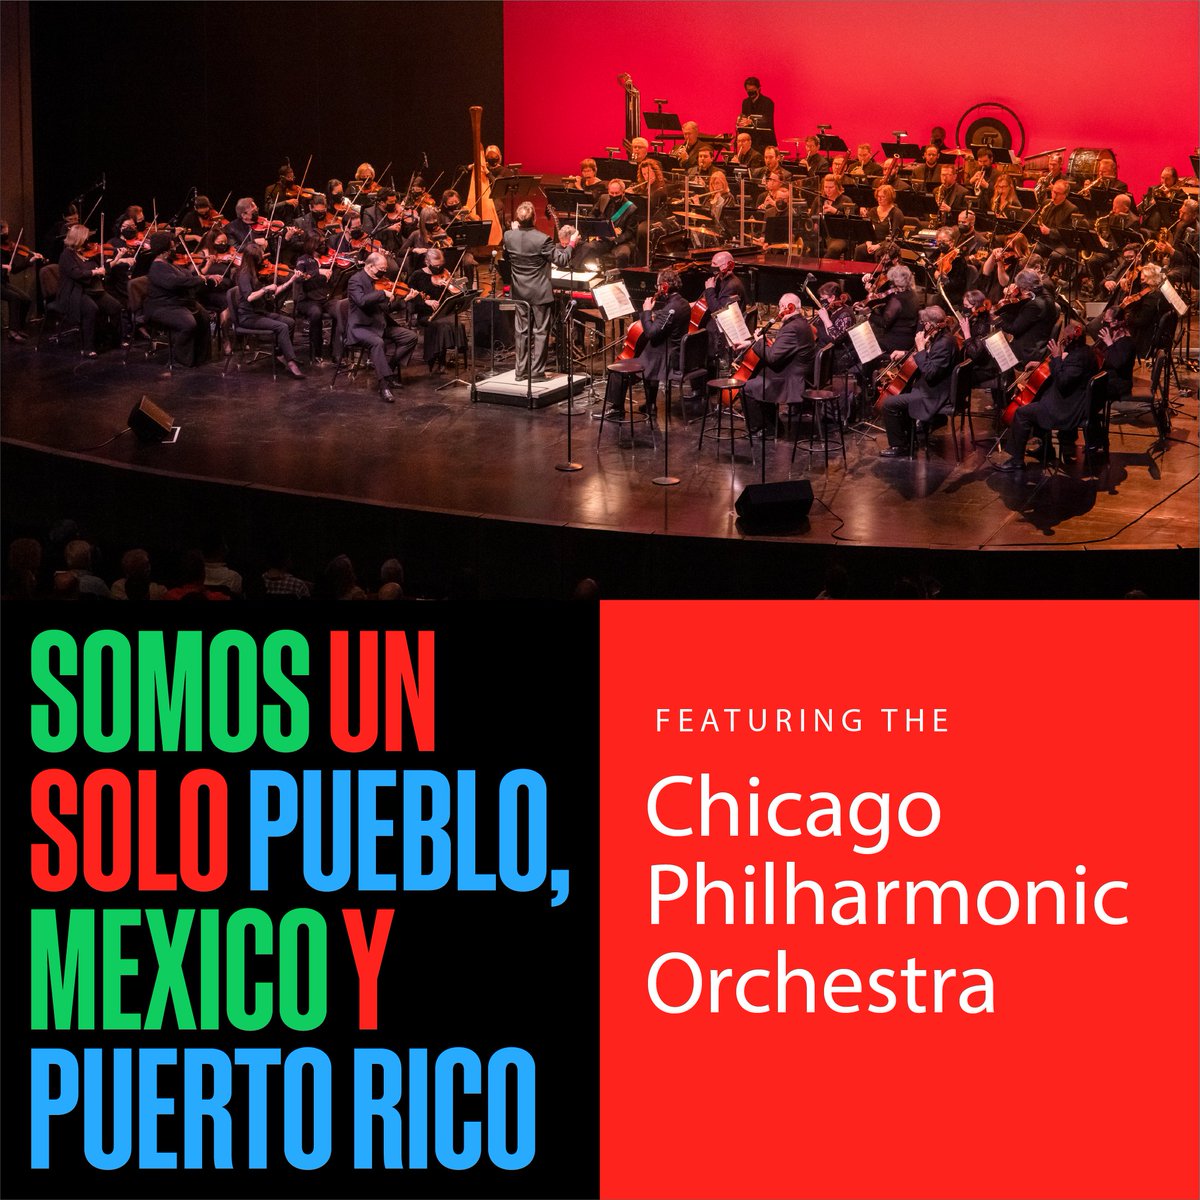 Let's welcome the @ChicagoPhil Orchestra onto our stage August 26th. RSVP: bit.ly/3XX8lqH * * This program is made possible by a grant from the Department of Cultural Affairs and Special Events with funding from the Millenium Park Foundation and the Pritzker Foundation.